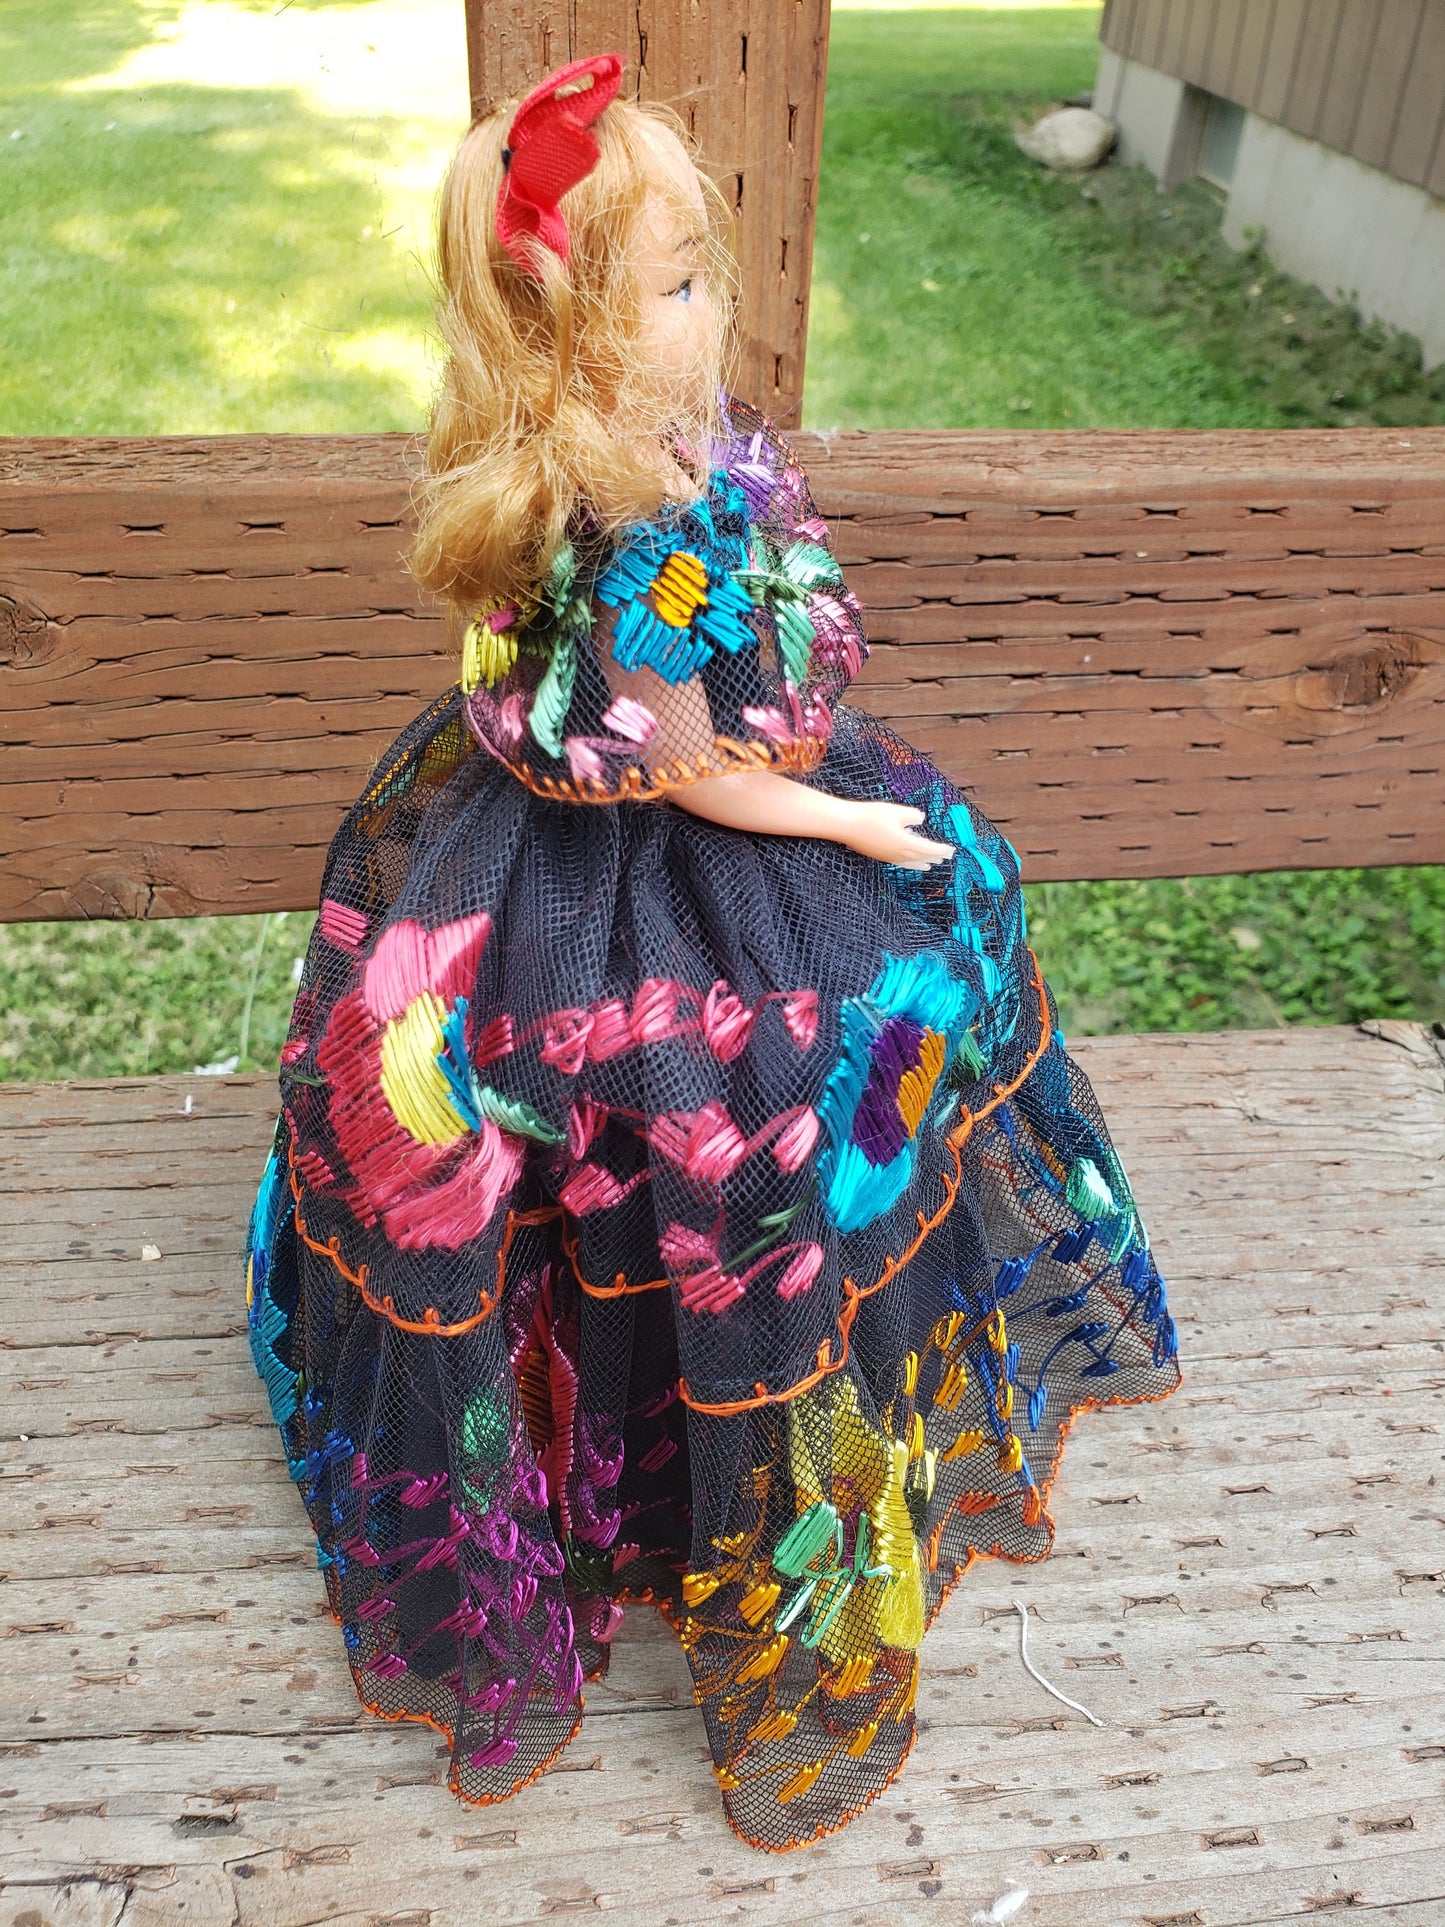 Vintage Doll in Embroidered Chiapaneca Dress